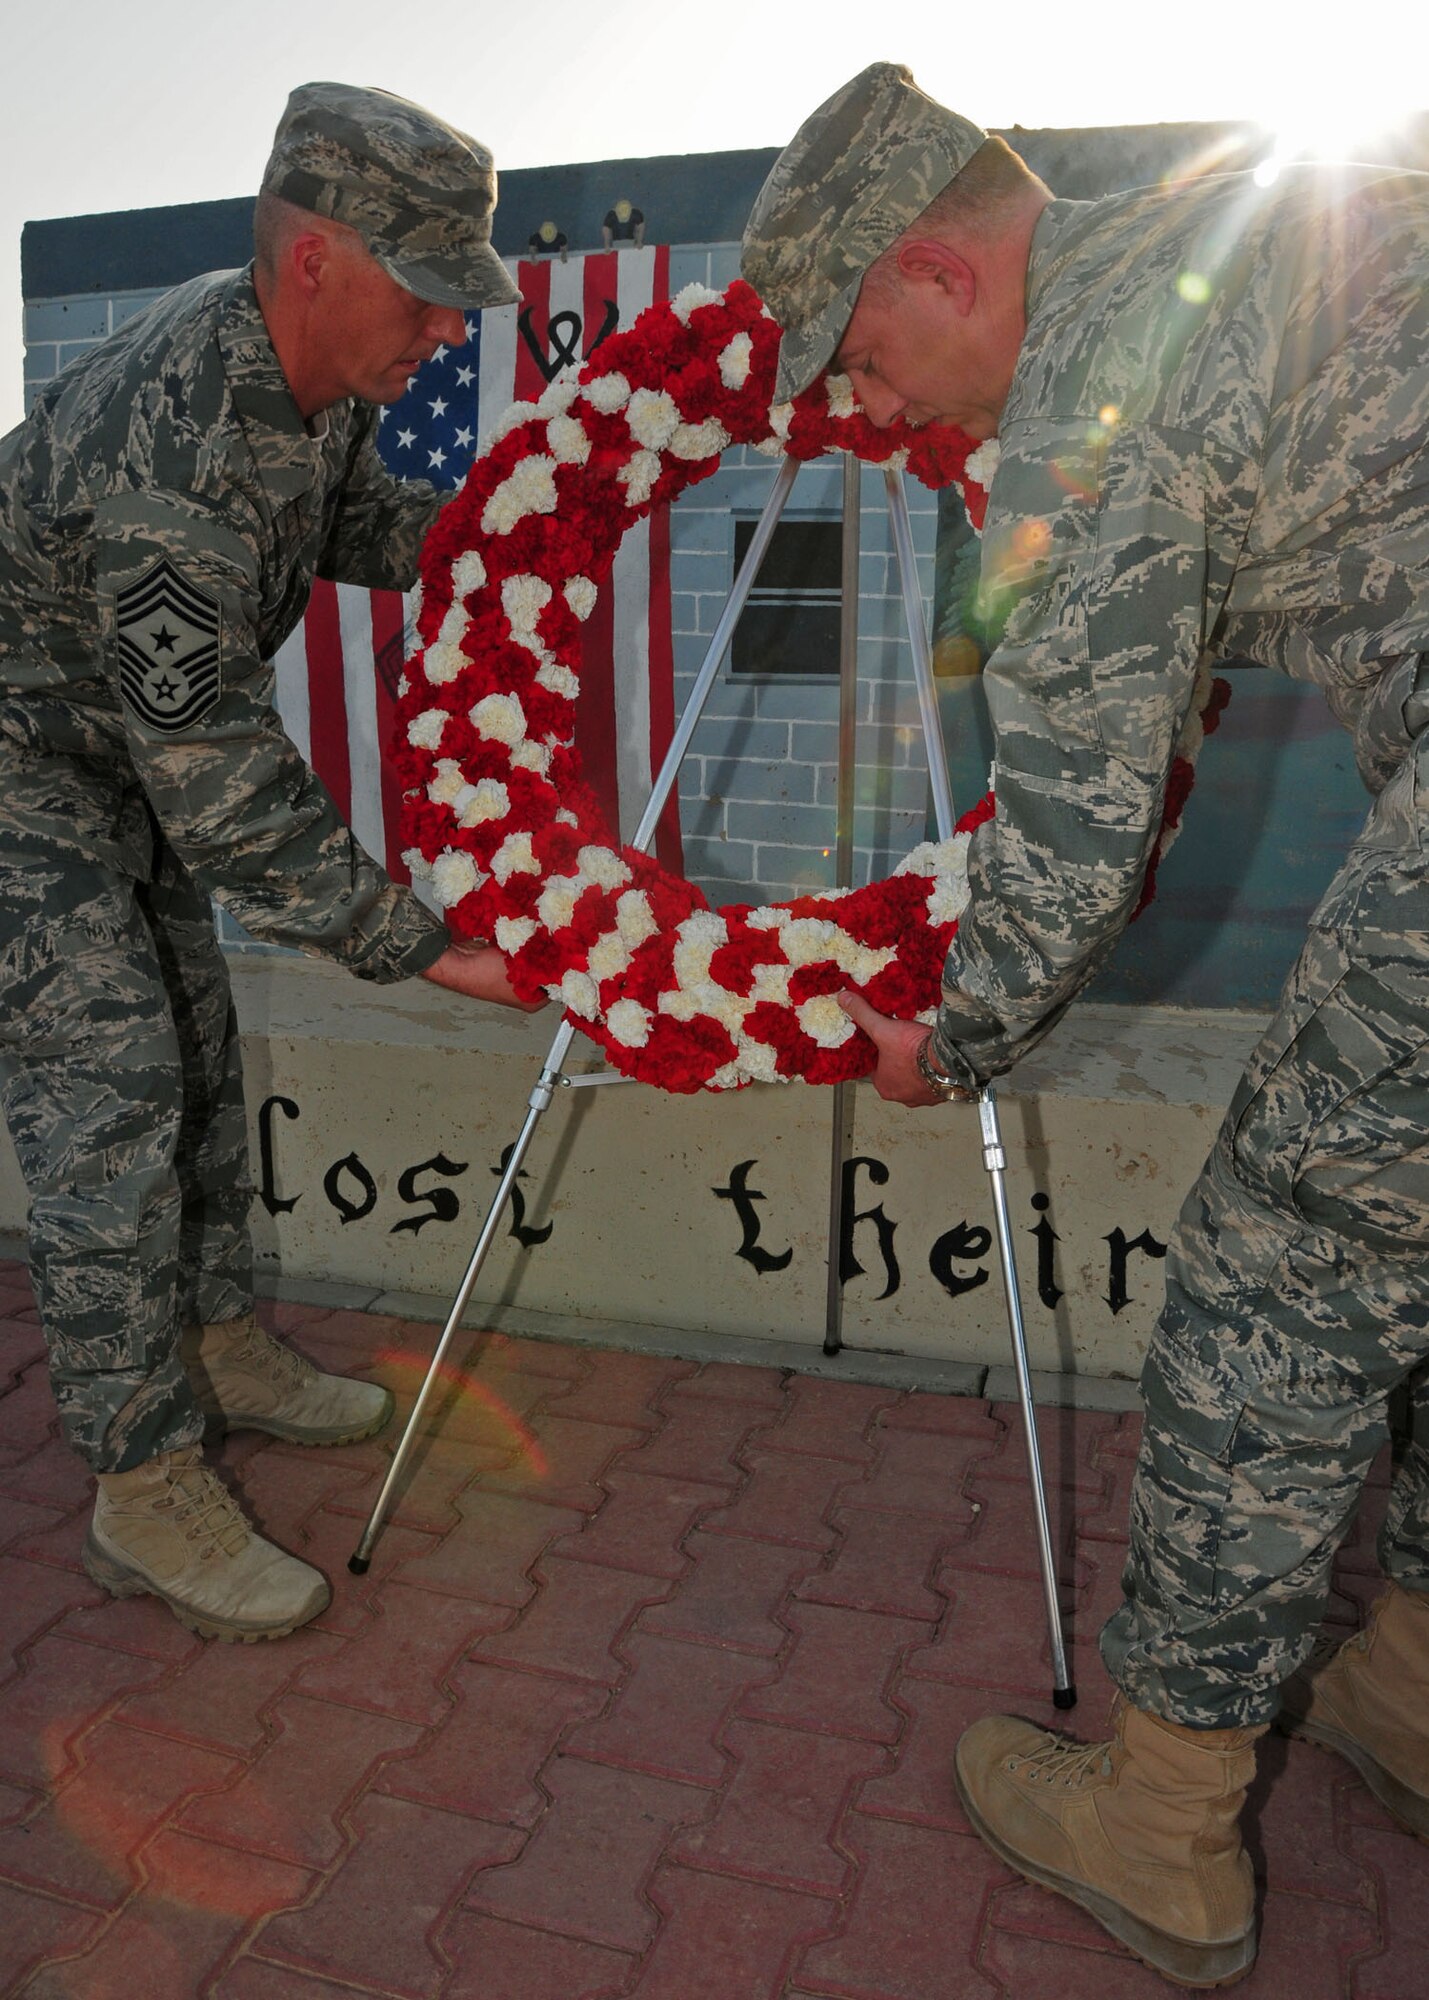 SOUTHWEST ASIA -- Chief Master Sgt. Douglas McIntyre, 386th Air Expeditionary Wing command chief, and Col. John R. Gordy II, 386th AEW commander, place a wreath at an air base in Southwest Asia during a Sept. 11, 2009 ceremony to honor the memory of those who died in the attacks of Sept. 11, 2001.  (U.S. Air Force photo/Tech. Sgt. Tony Tolley)